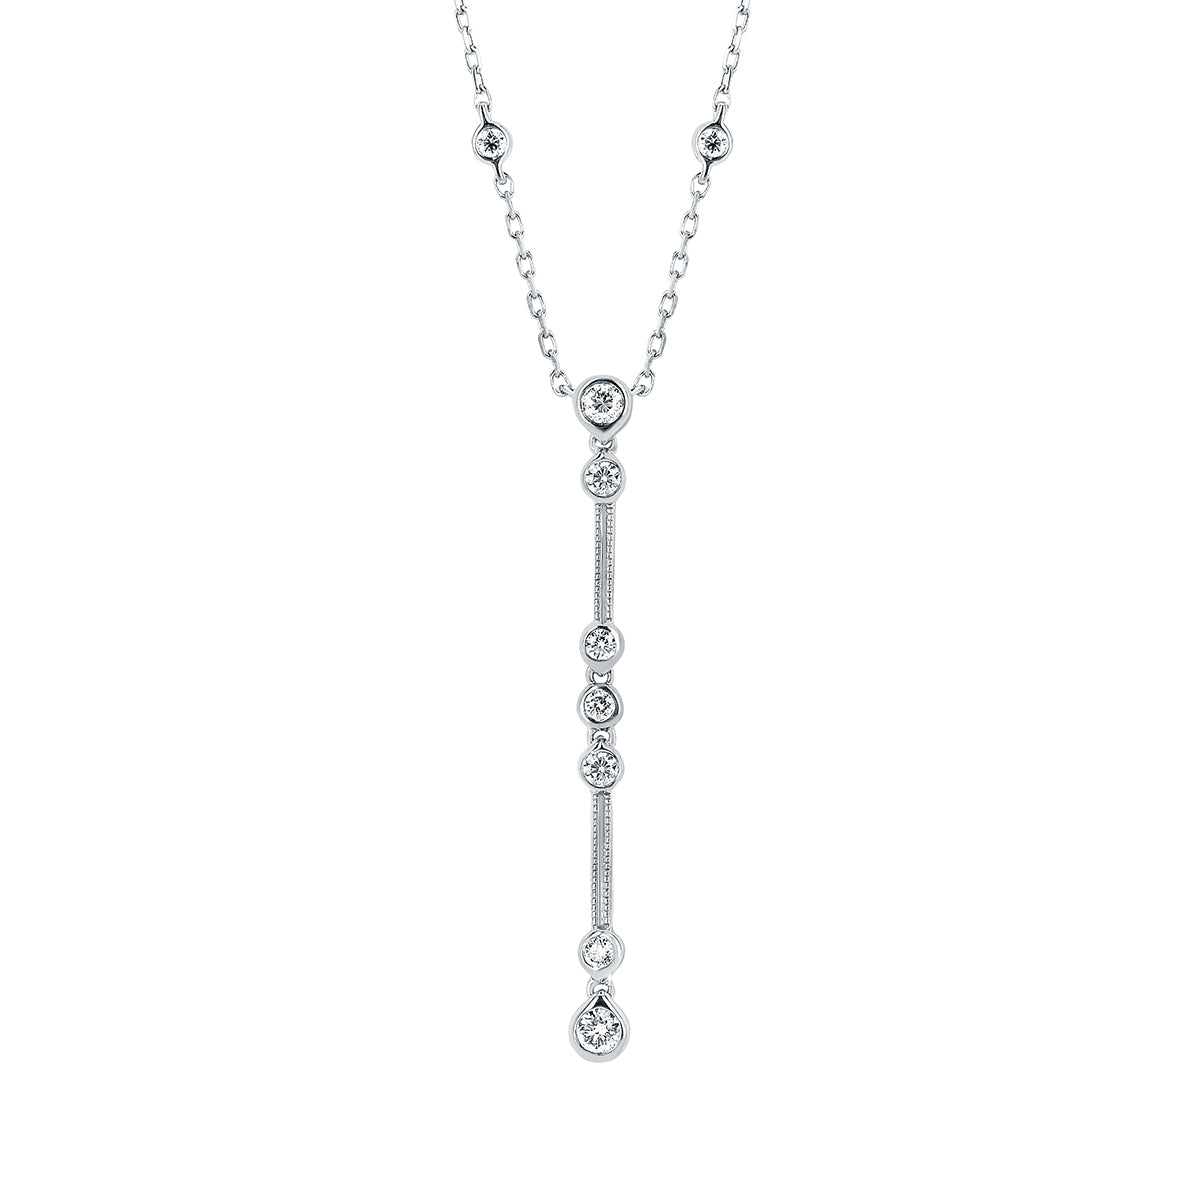 Diamond Bar Lariat Necklace in White, Yellow or Rose Gold - Talisman Collection Fine Jewelers